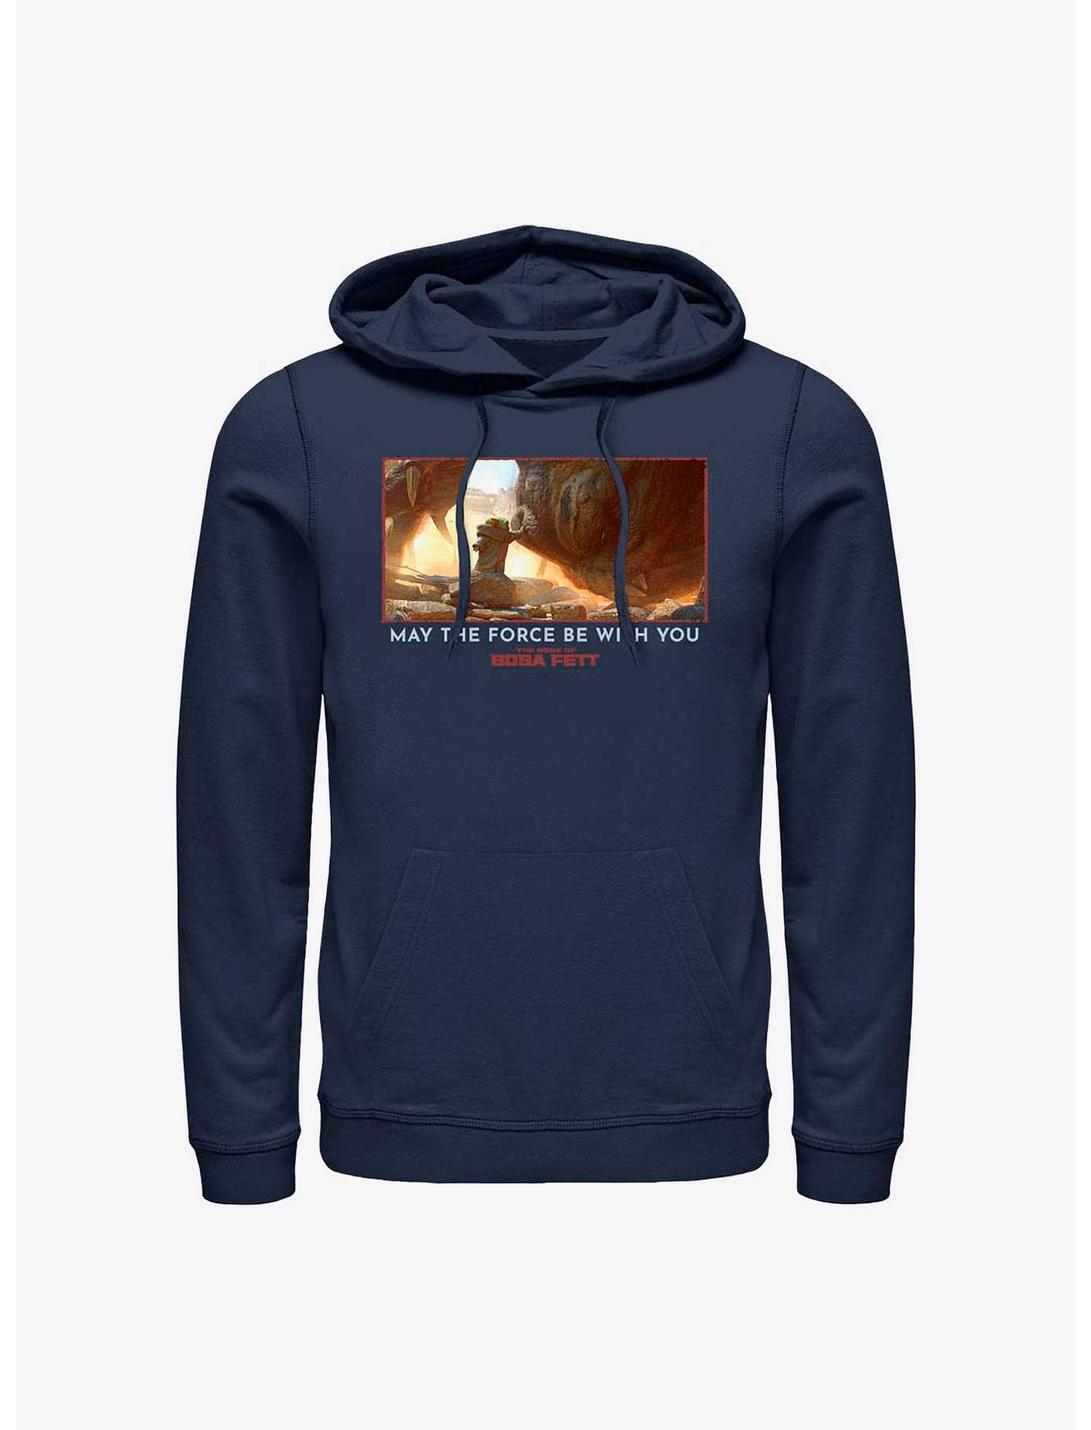 Star Wars The Book Of Boba Fett The Child Never Give Up Hoodie, NAVY, hi-res